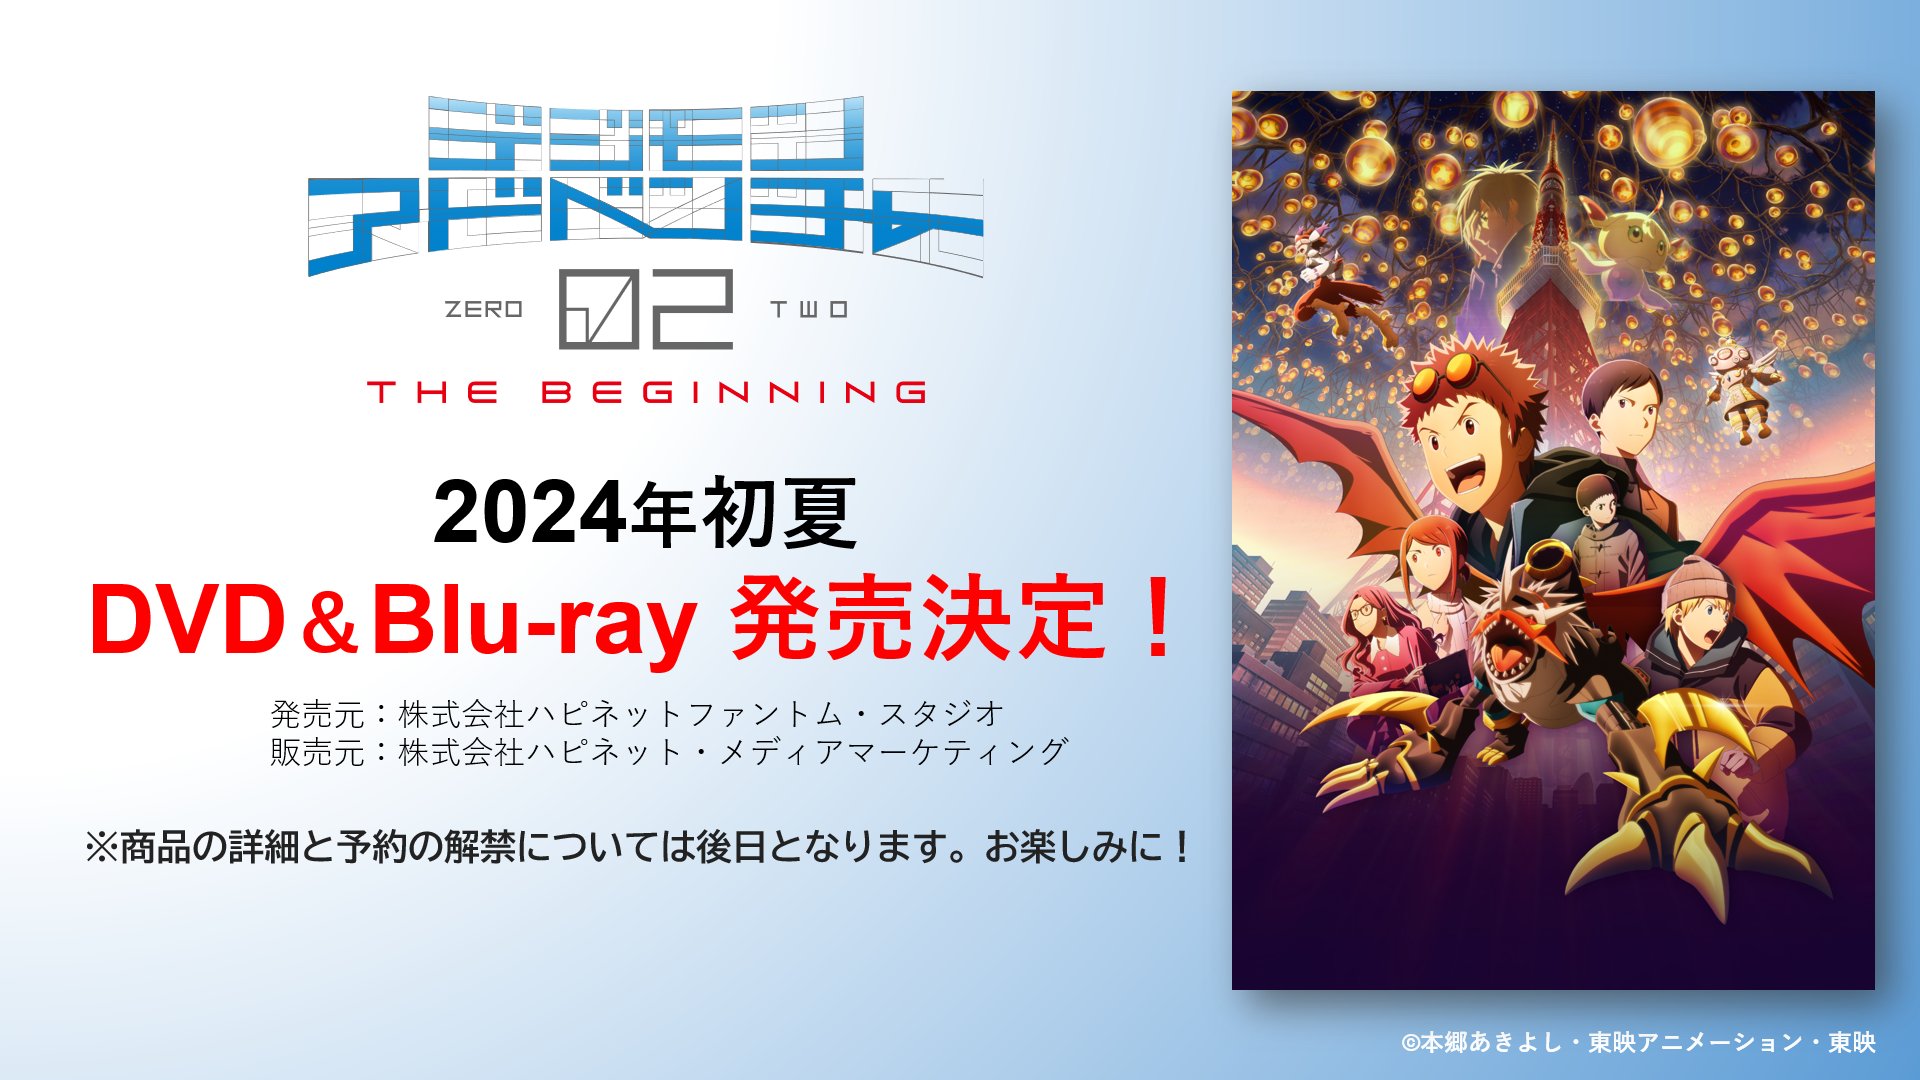 Digimon Adventure 02 The Beginning' Coming to U.S. Theaters for